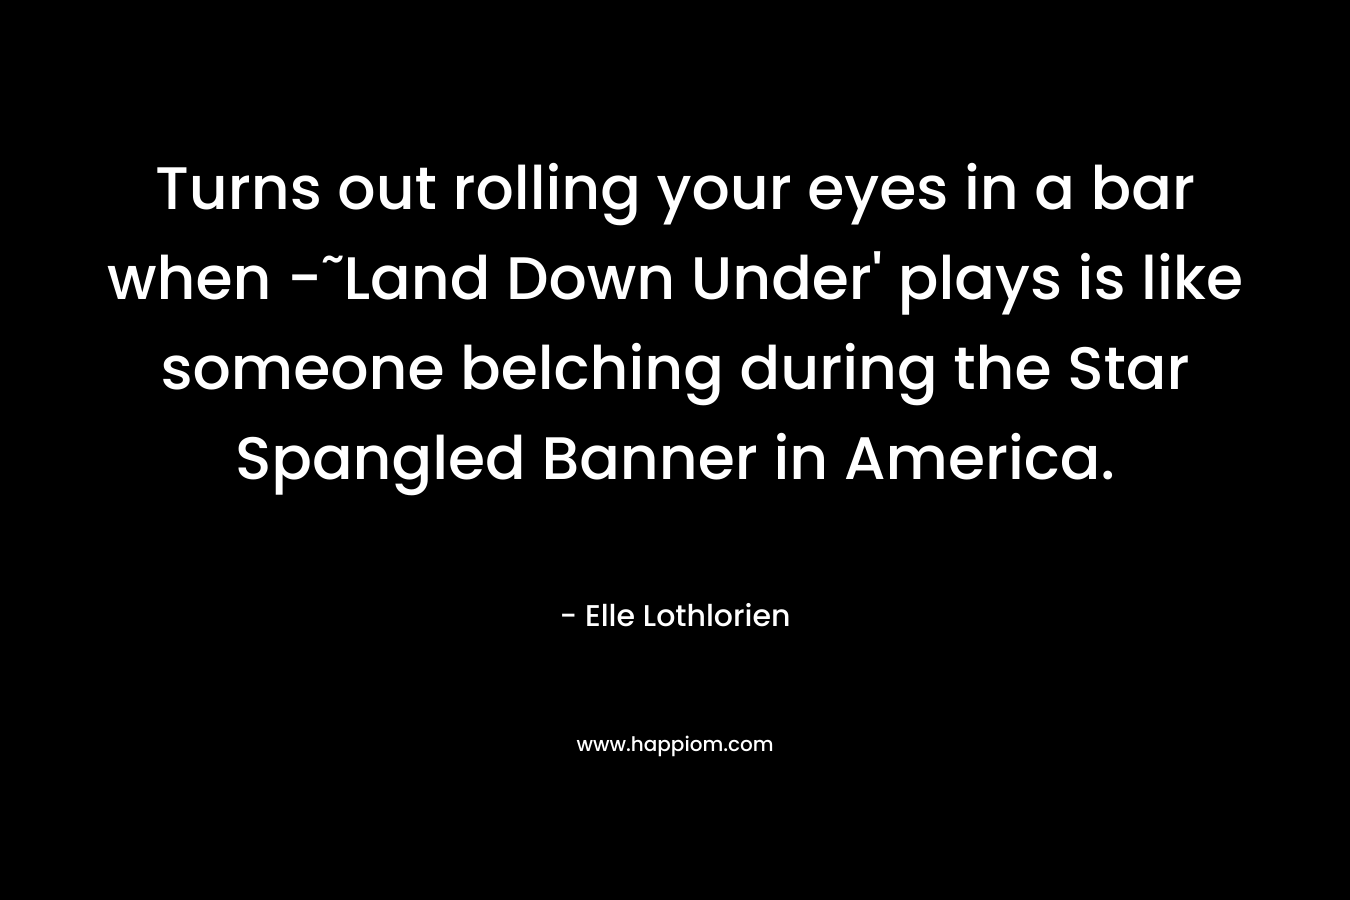 Turns out rolling your eyes in a bar when -˜Land Down Under' plays is like someone belching during the Star Spangled Banner in America.